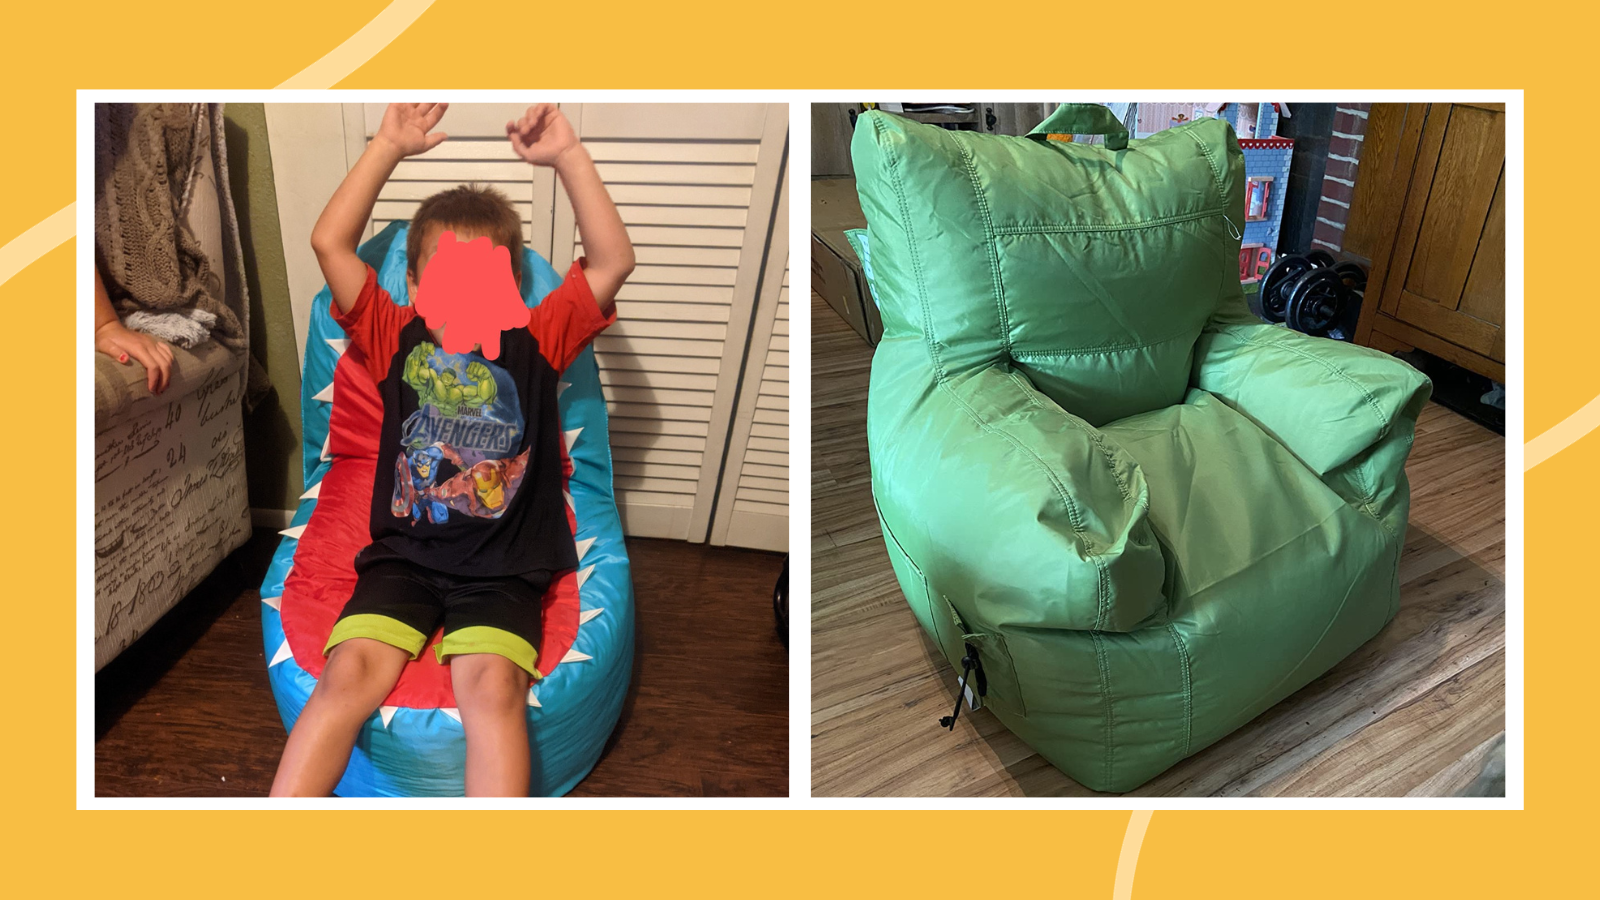 Examples of the best bean bag chairs, including a boy sitting in a shark bean bag chair and a large green bean bag chair.